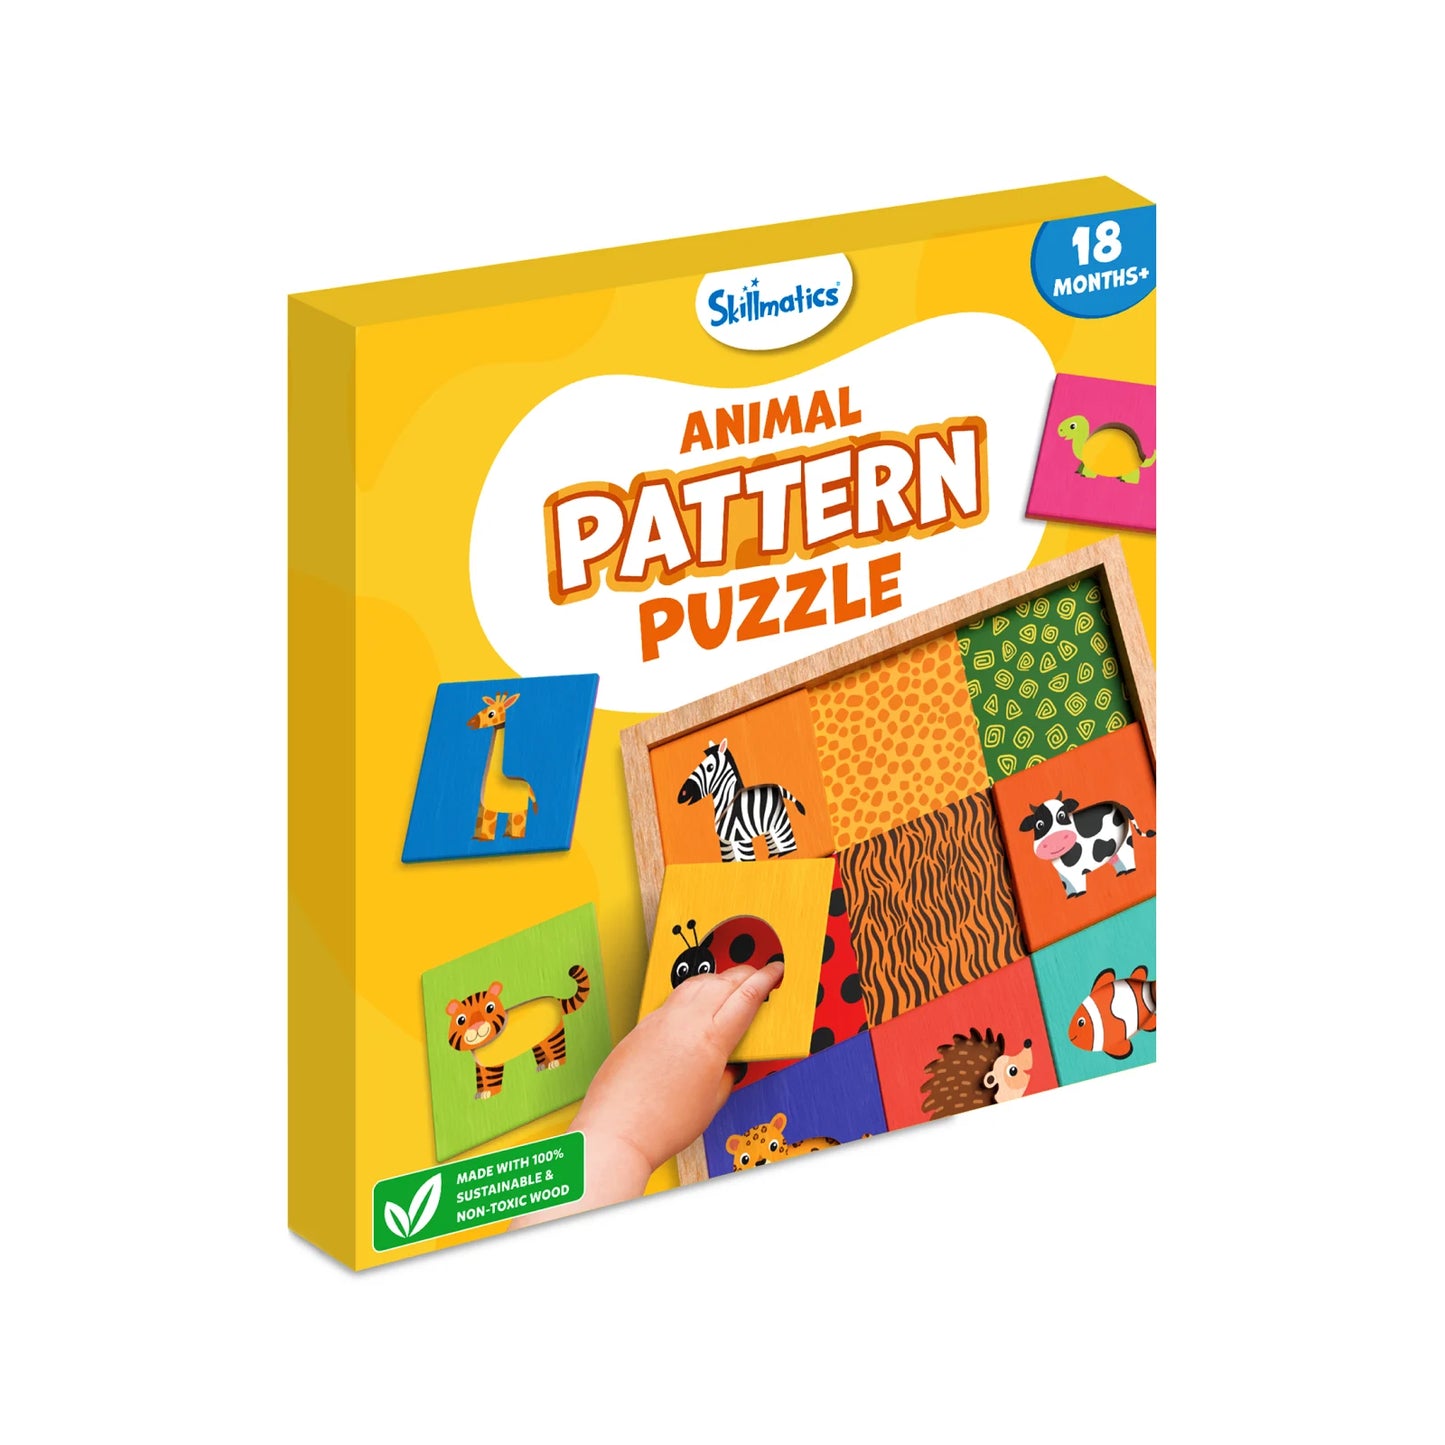 Animal Pattern Puzzle Set | Educational Matching & Learning Game (ages 18 months+)